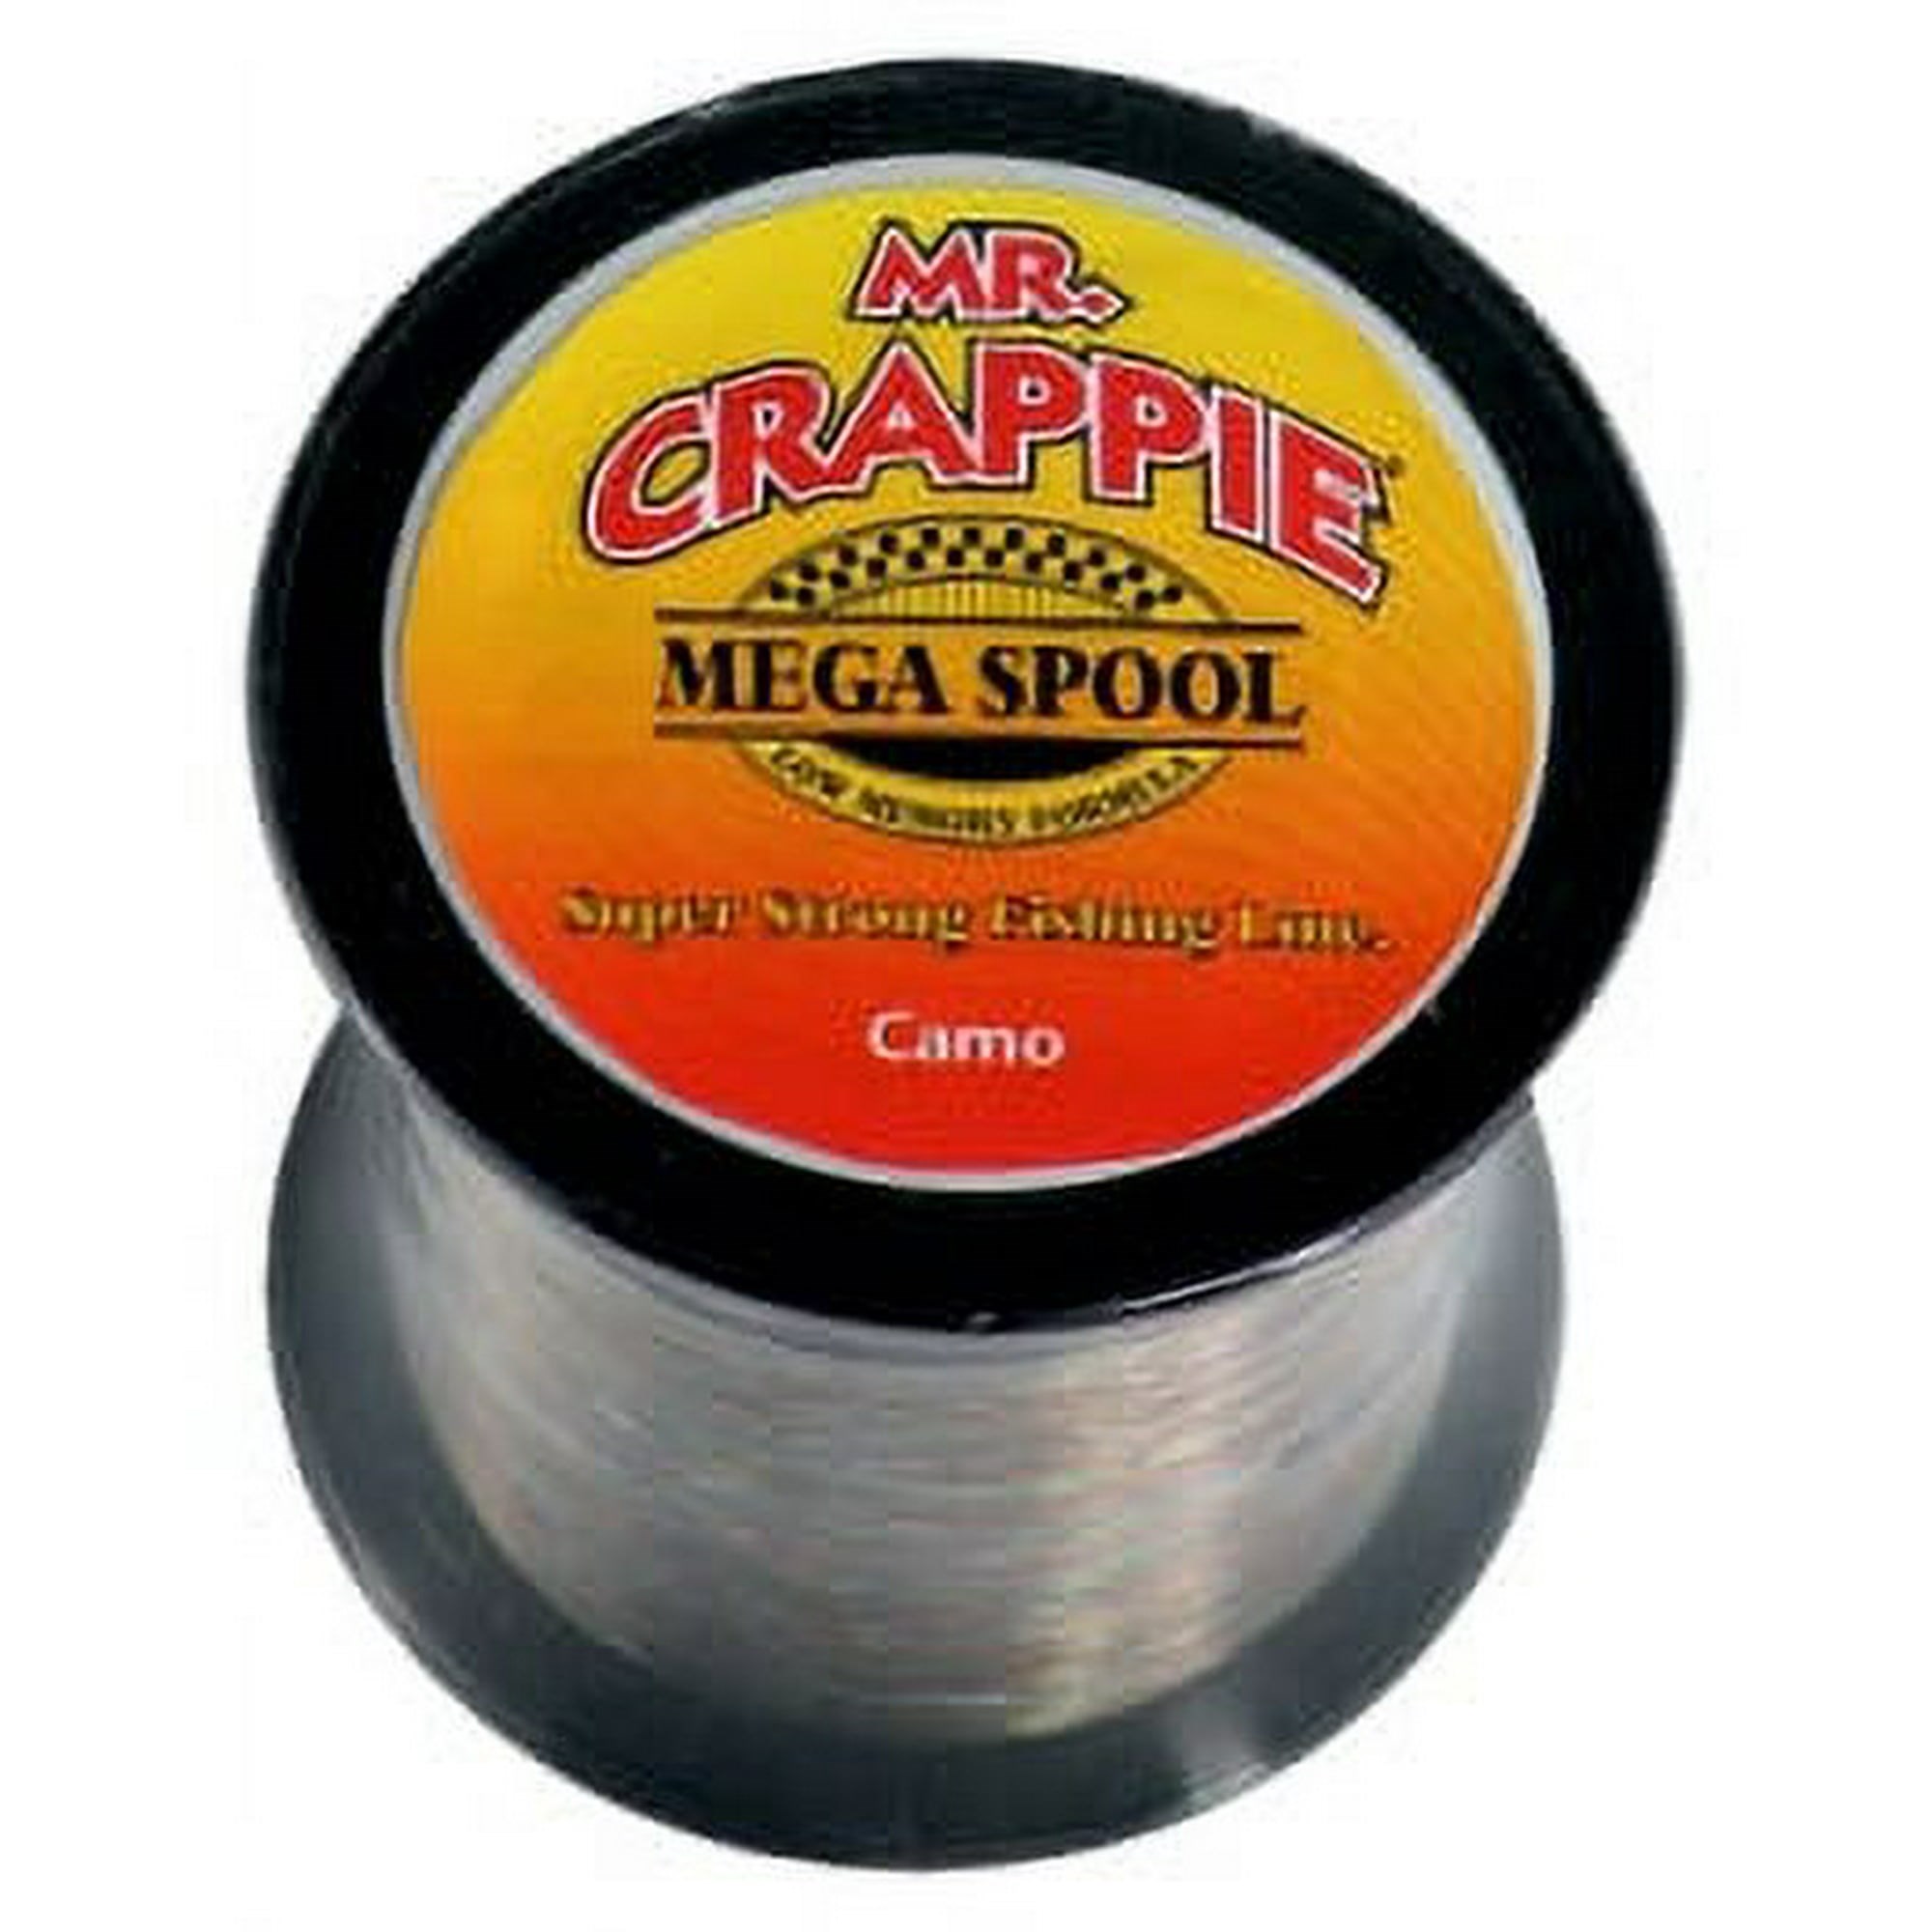 Mr. Crappie Mega Spools Fishing Line  Up to 32% Off Free Shipping over $49!